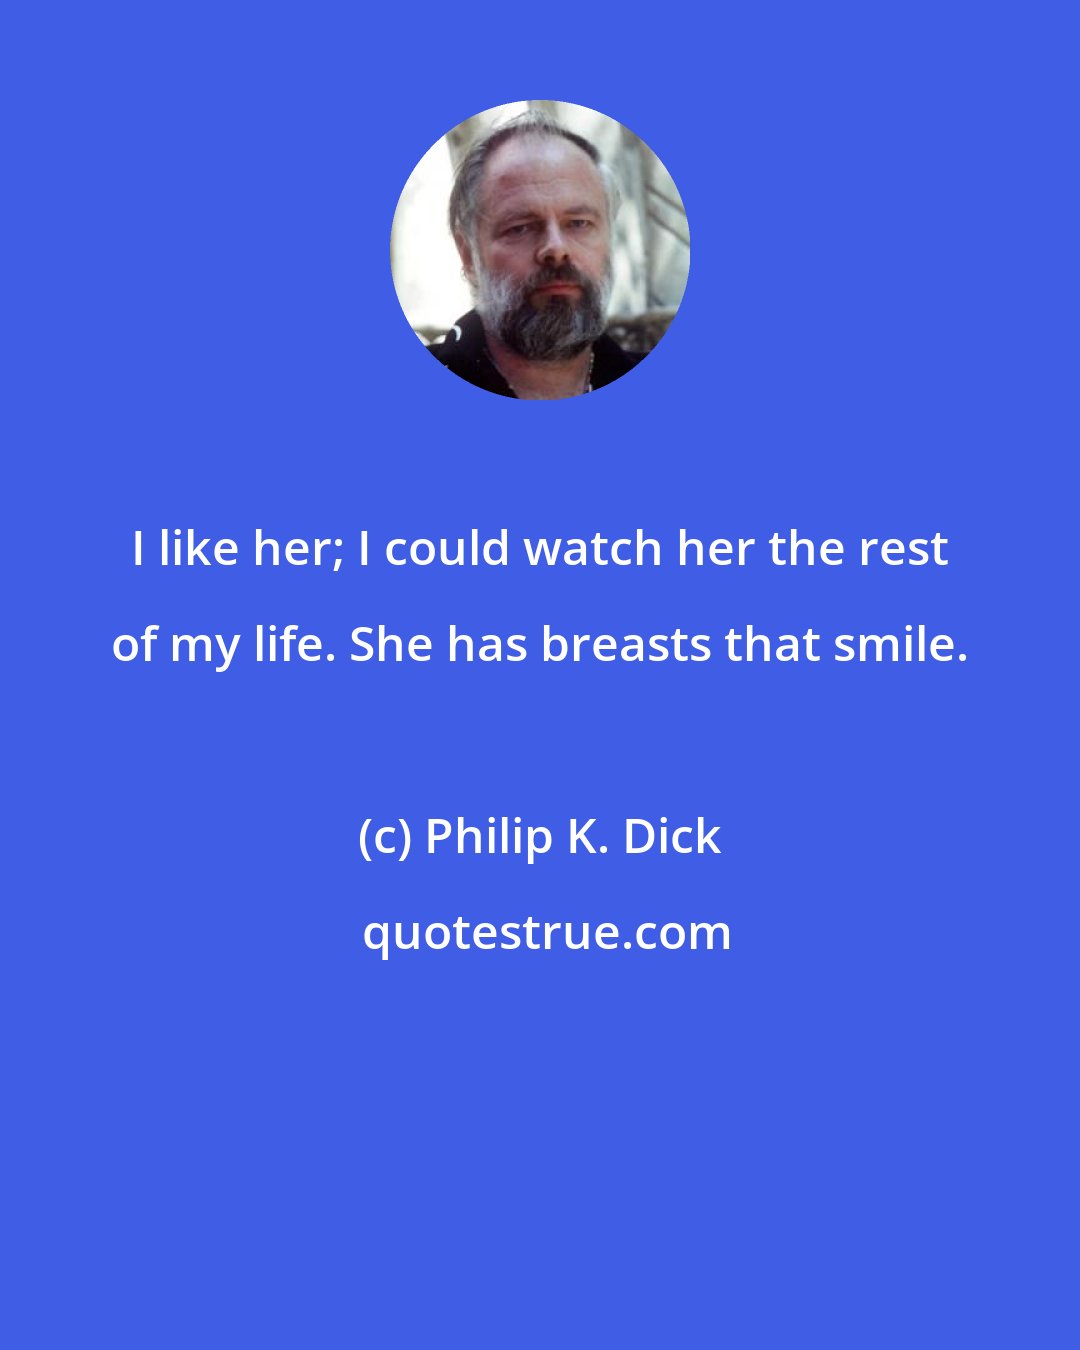 Philip K. Dick: I like her; I could watch her the rest of my life. She has breasts that smile.